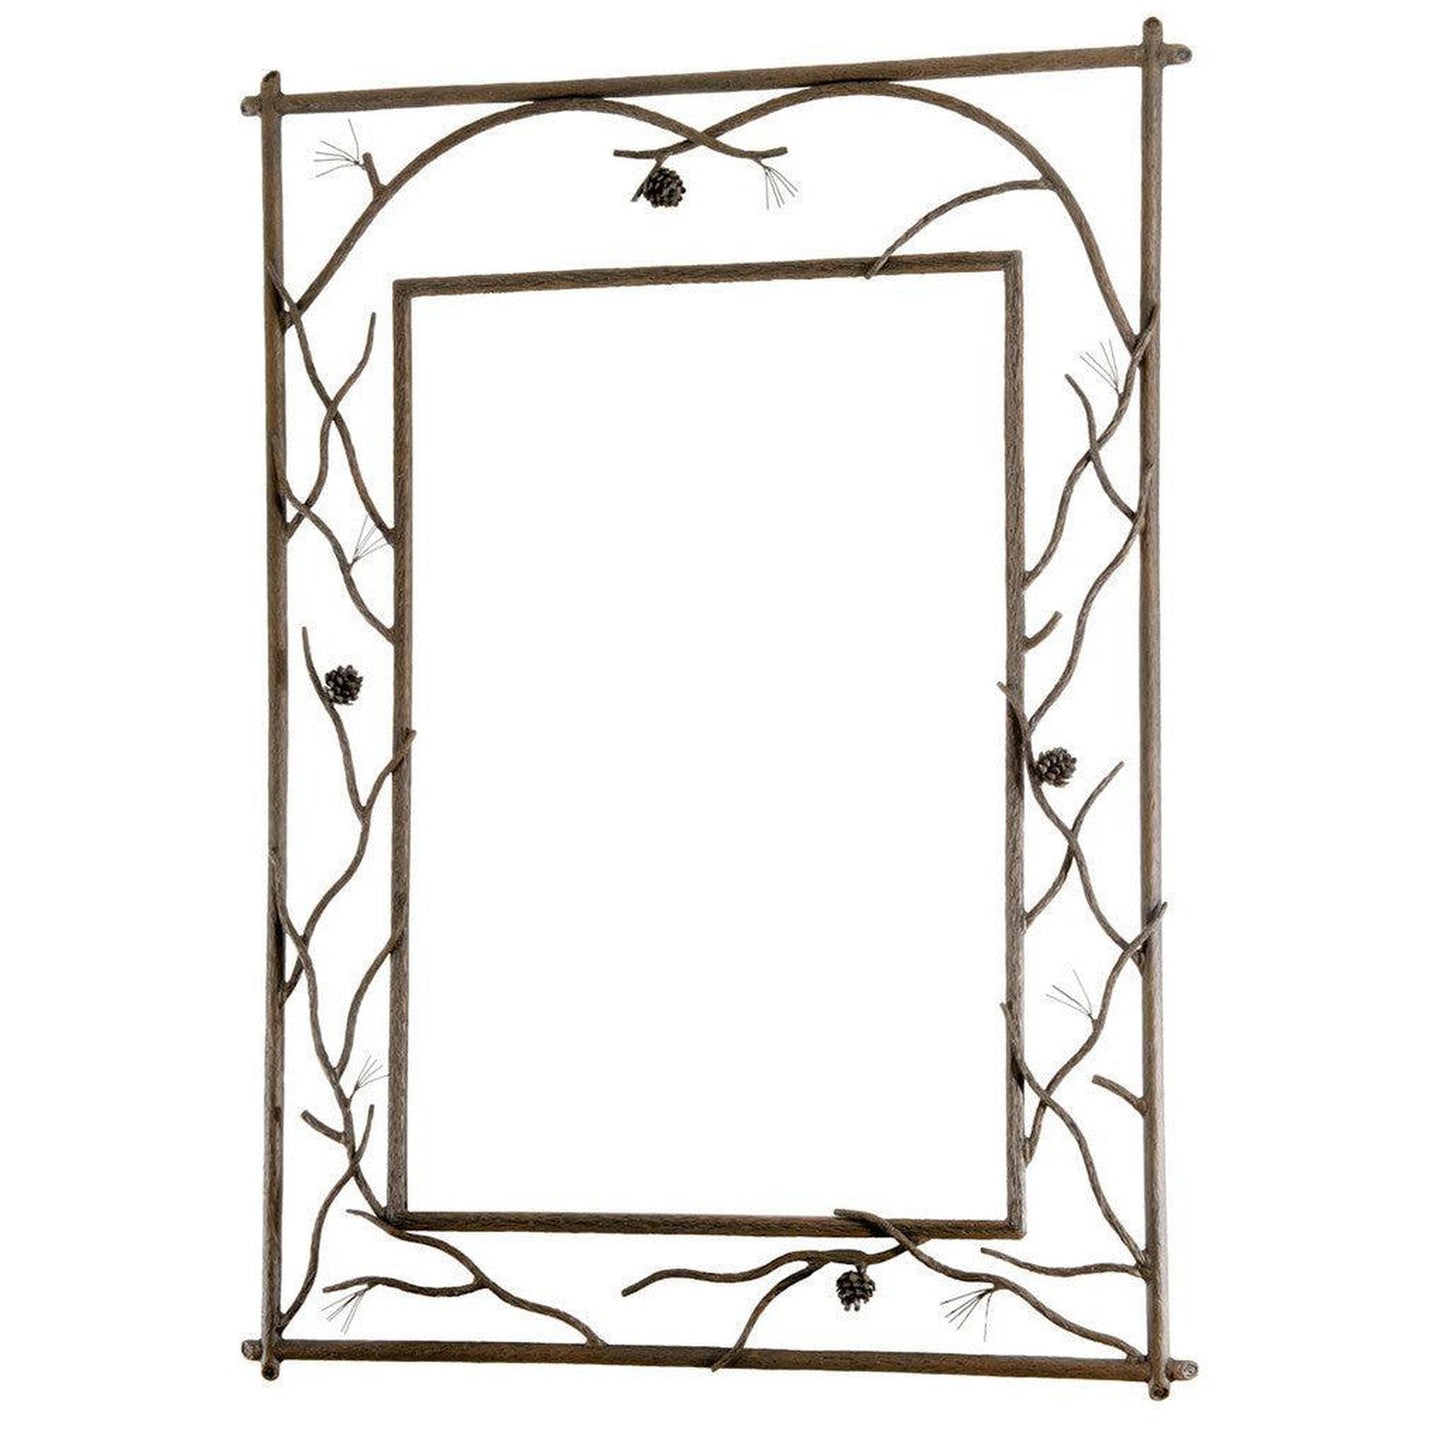 Stone County Ironworks Pine 29" x 35" Small Satin Black Branched Iron Wall Mirror With Gold Iron Accent